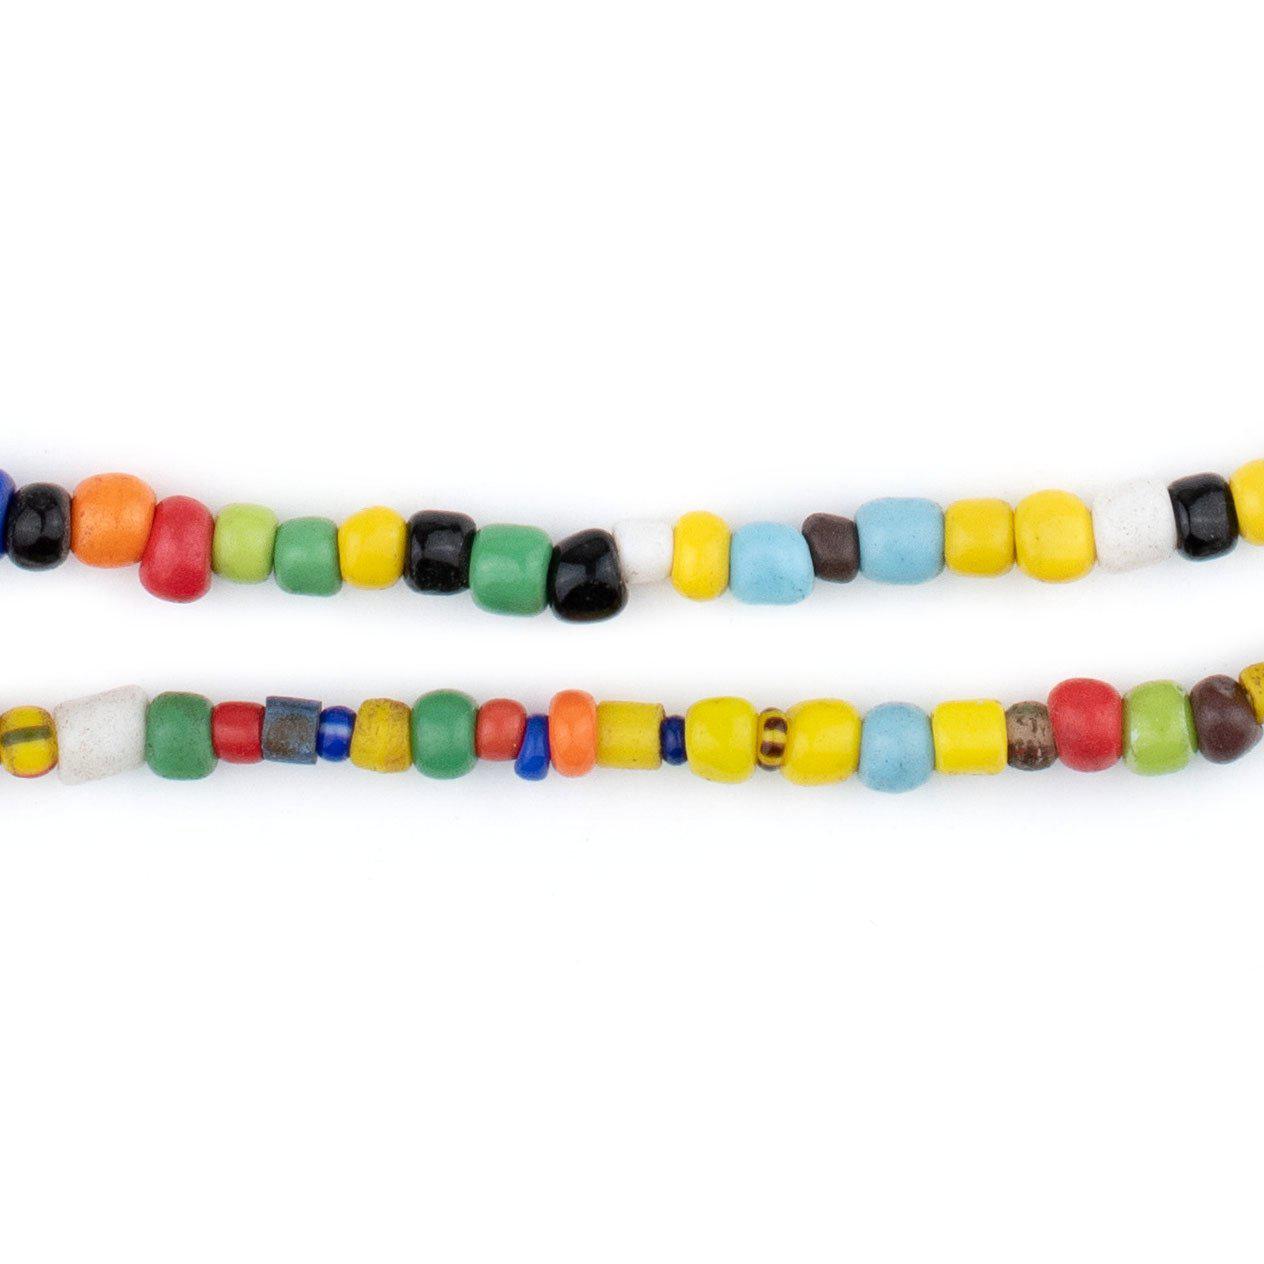 African Trade Beads